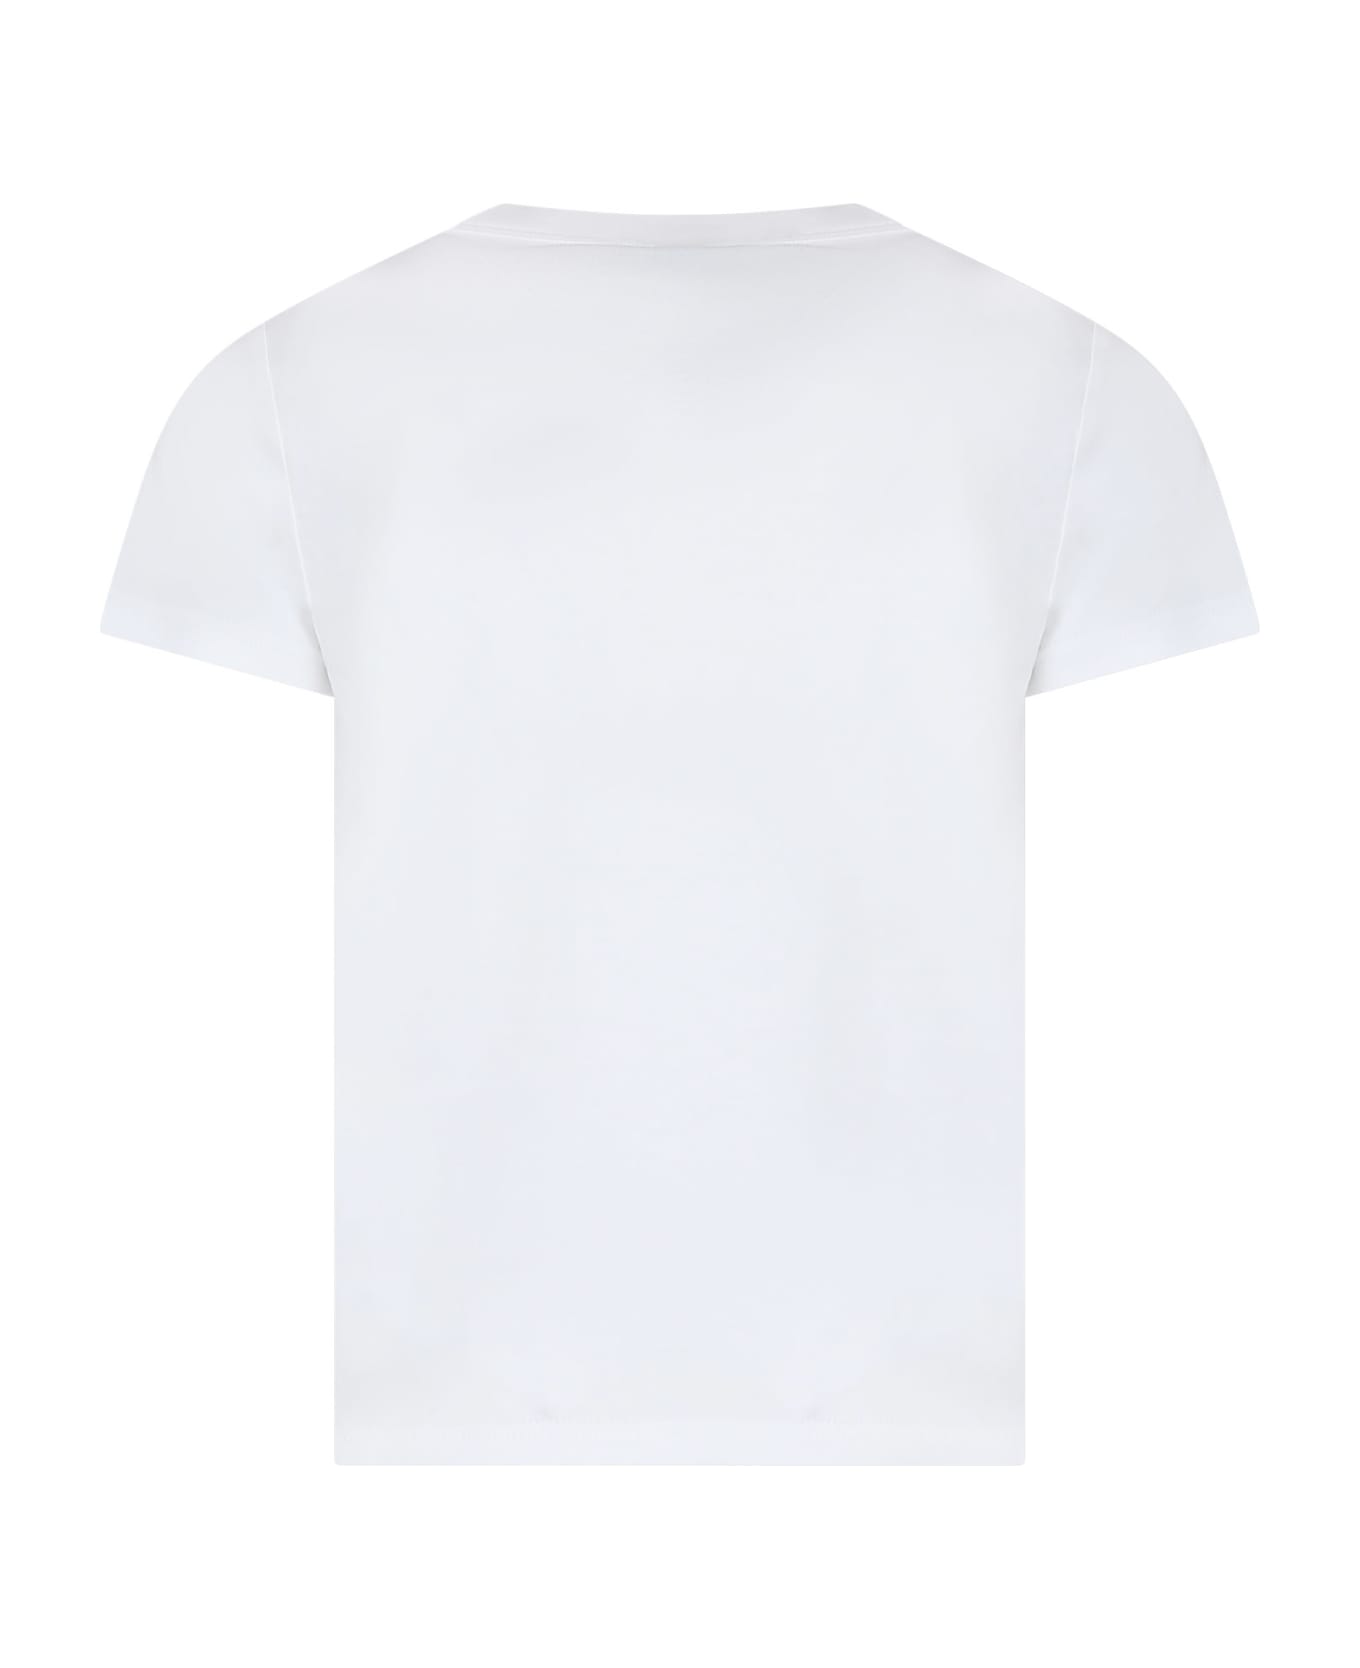 Marc Jacobs White T-shirt For Girl With Landscape Print - White